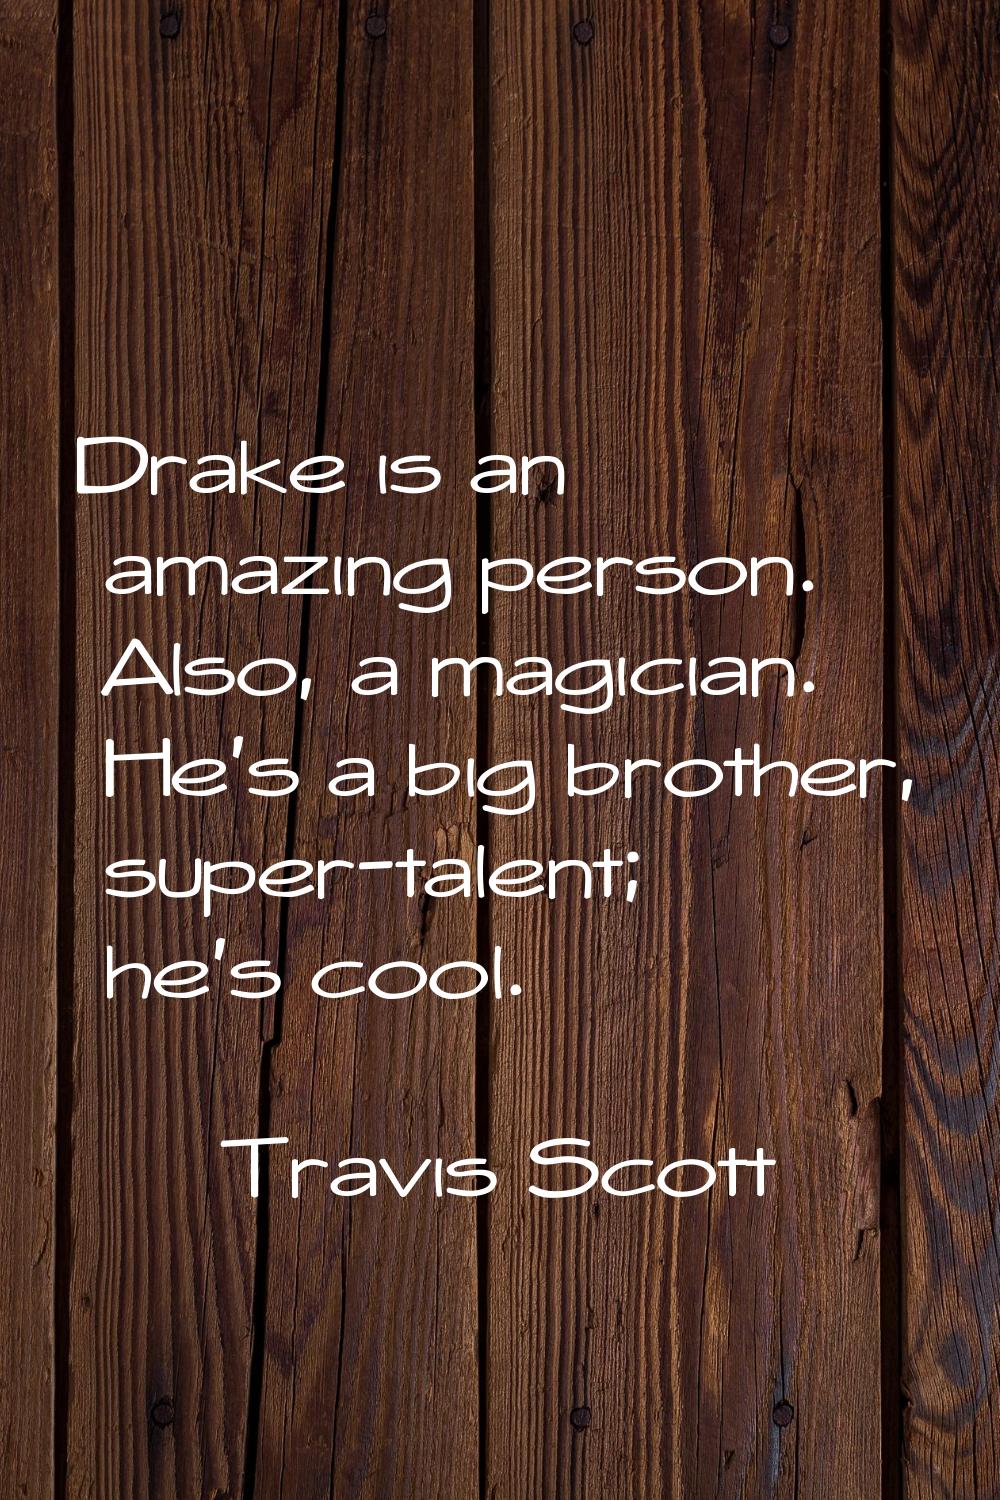 Drake is an amazing person. Also, a magician. He's a big brother, super-talent; he's cool.